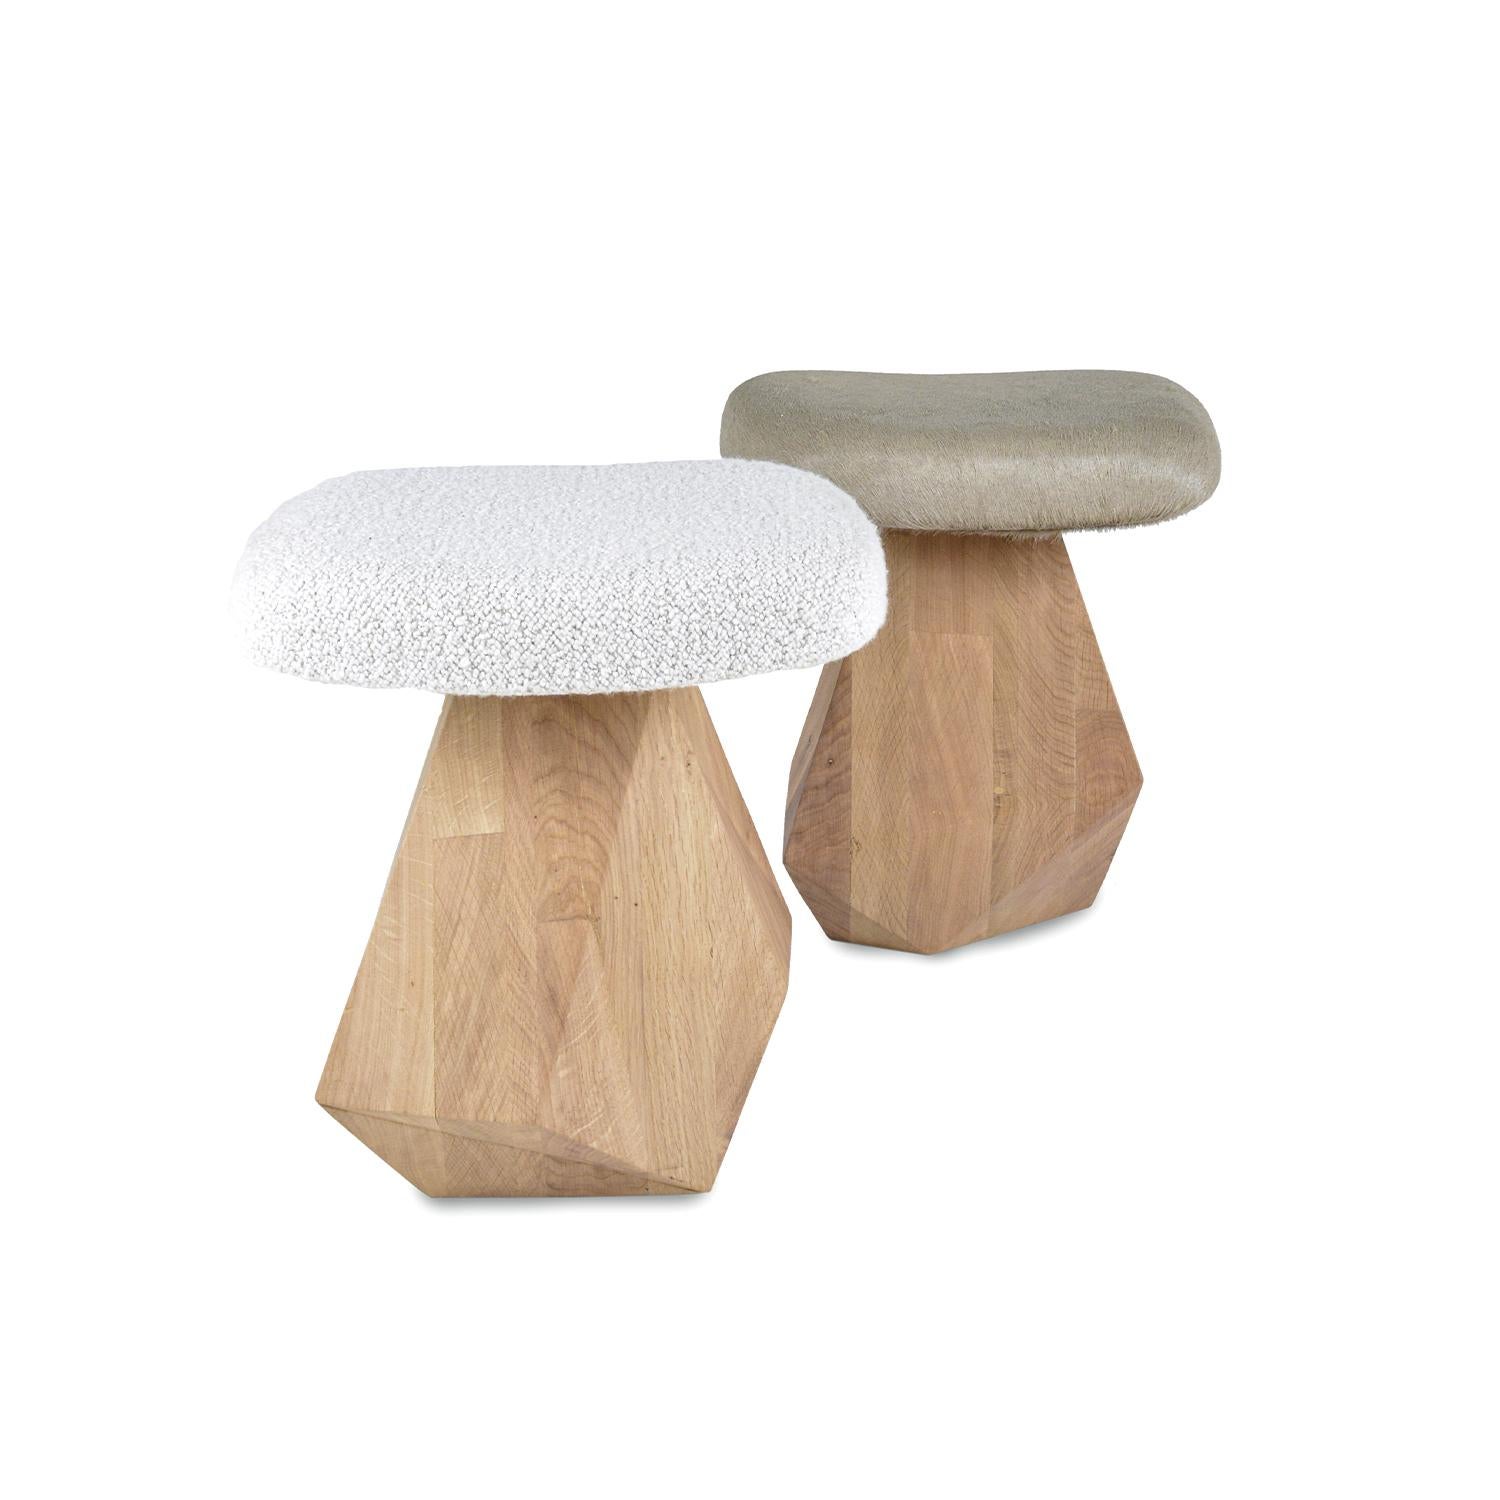 Dolmen Stool, Upholstery in Fabric, Hand Carved Ash/Beech Base In New Condition For Sale In Fiscal Amares, PT